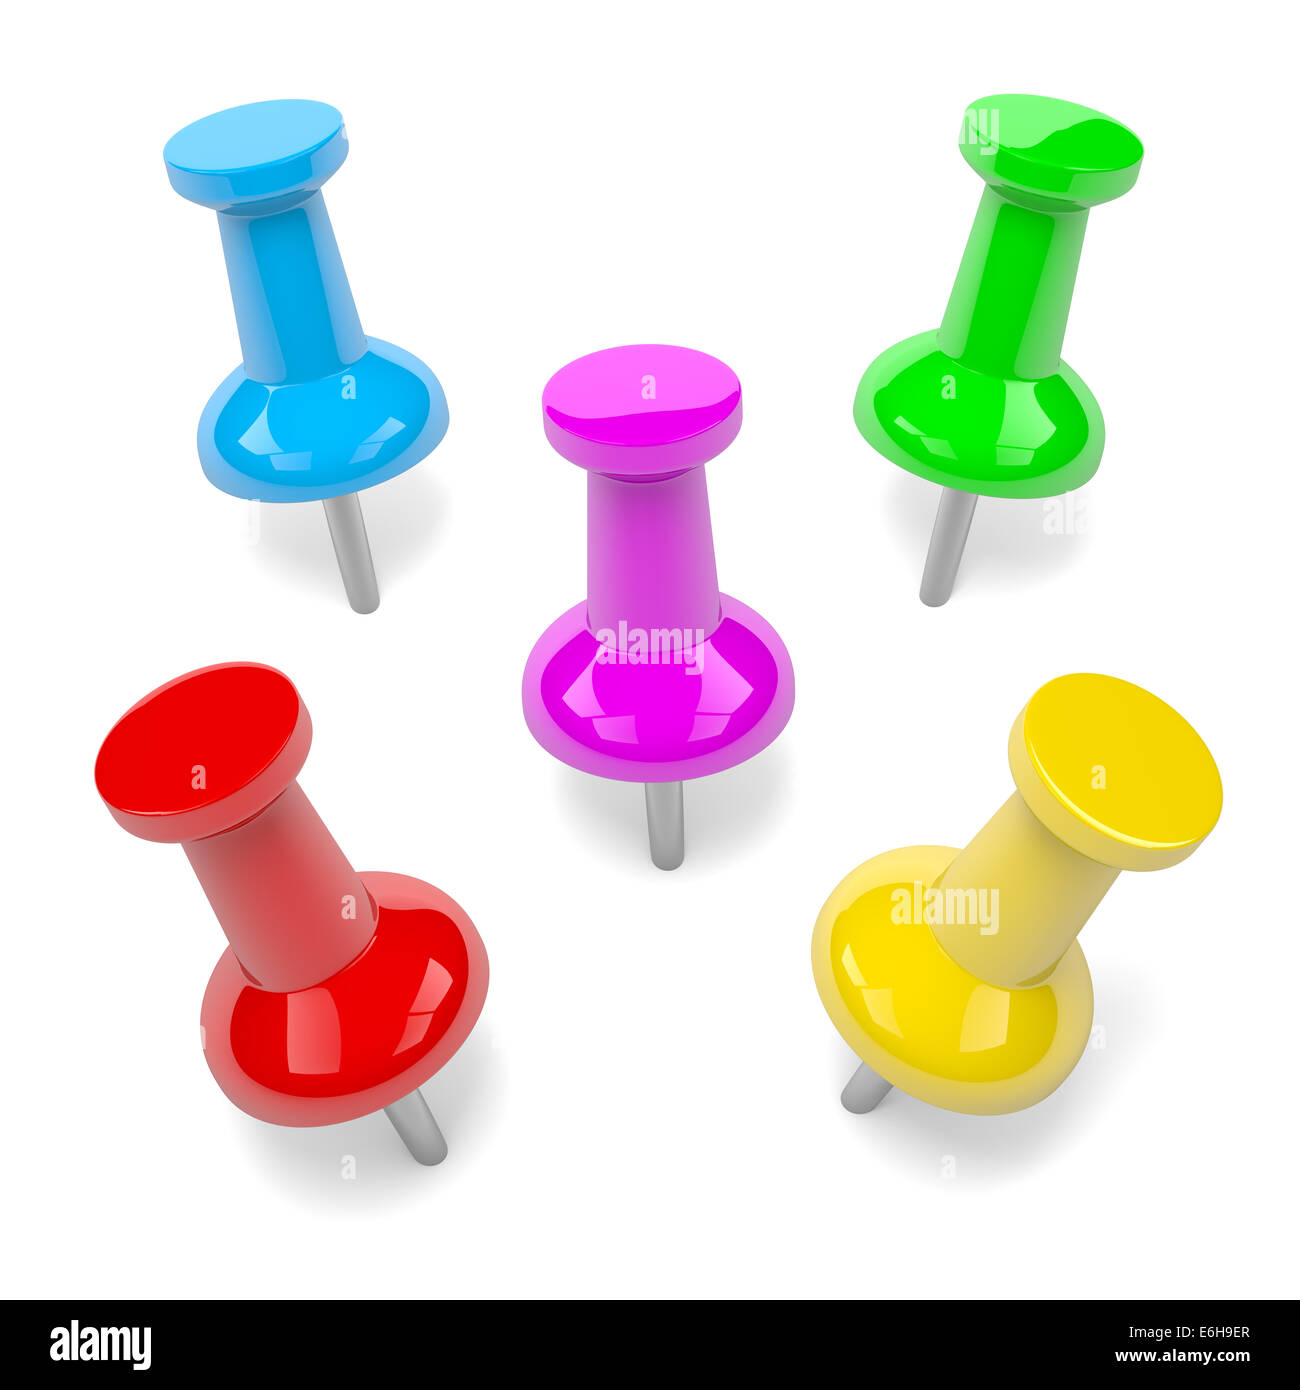 Colorful Pushpin Series Isolated on White Background Stock Photo